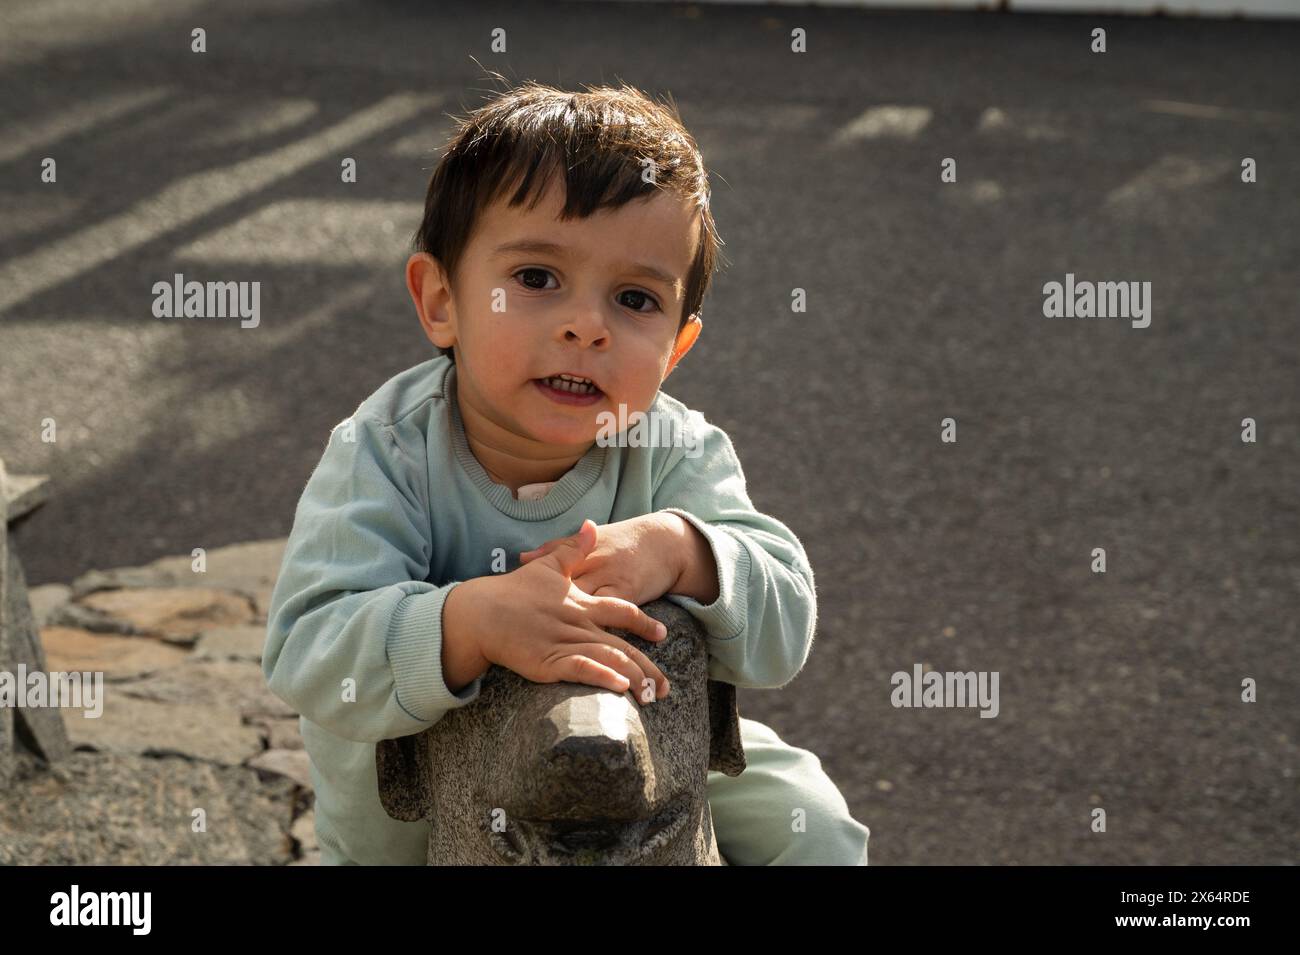 A young boy is sitting on a dog statue. He is smiling and has his hand on the statue Stock Photo